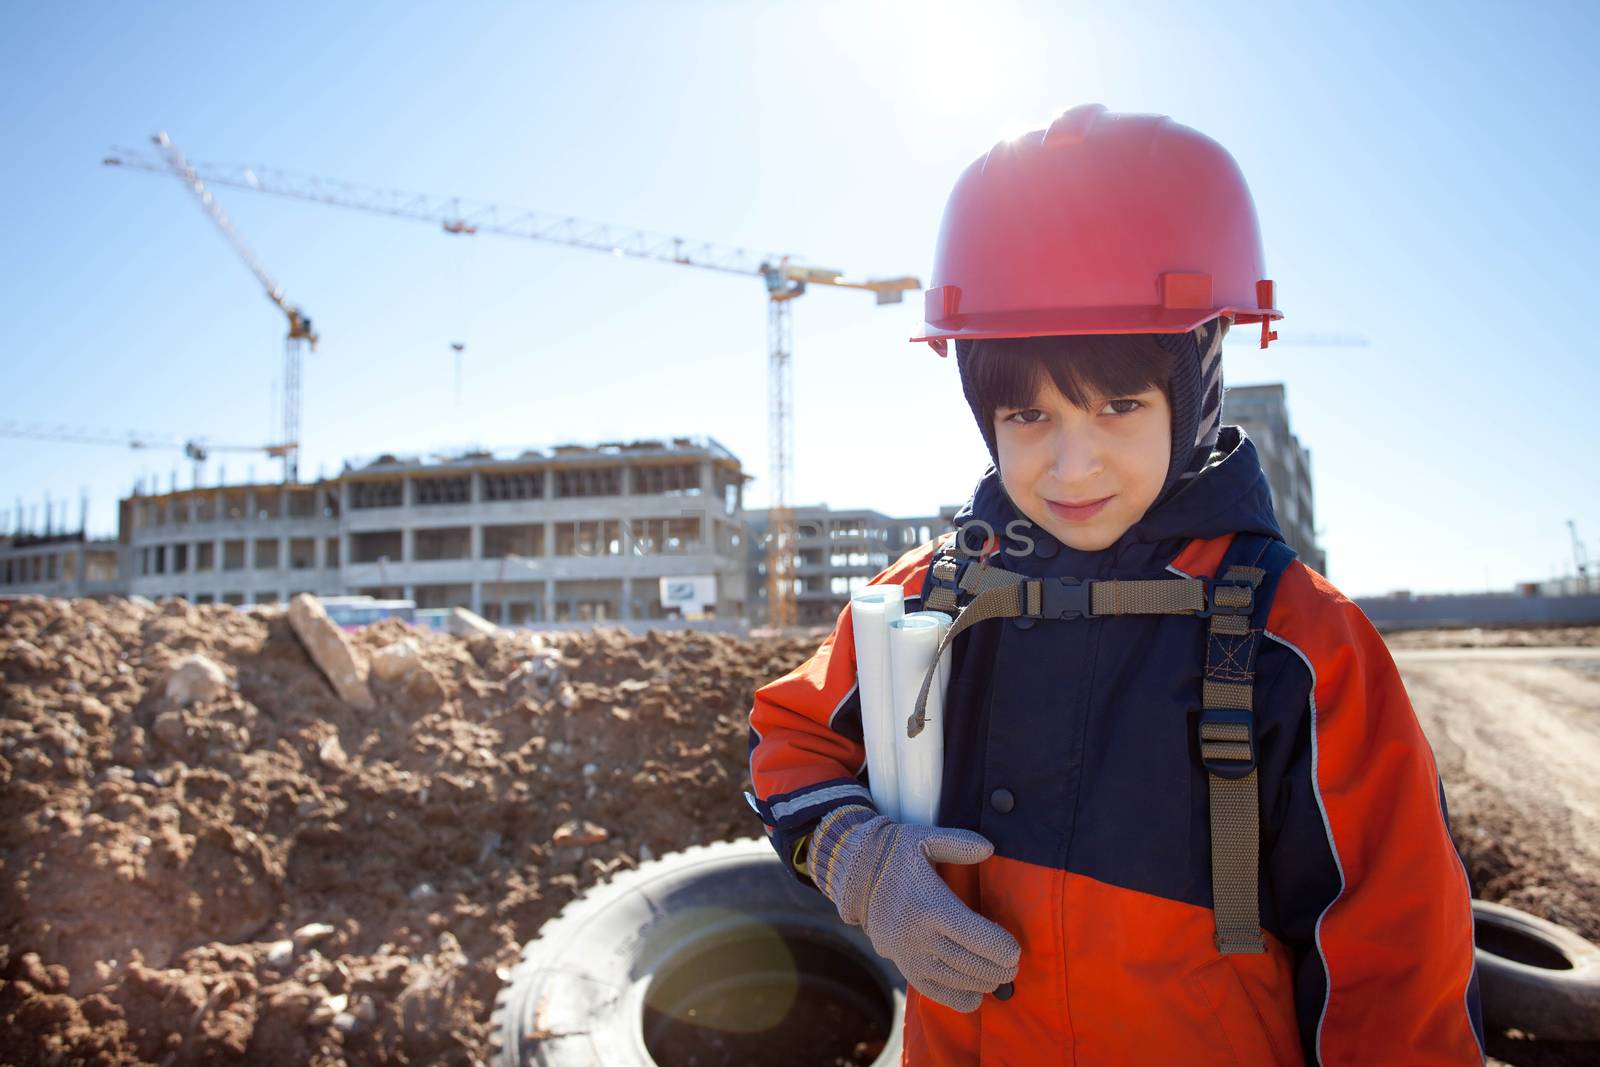 young builder in a red helmet on a background of construction